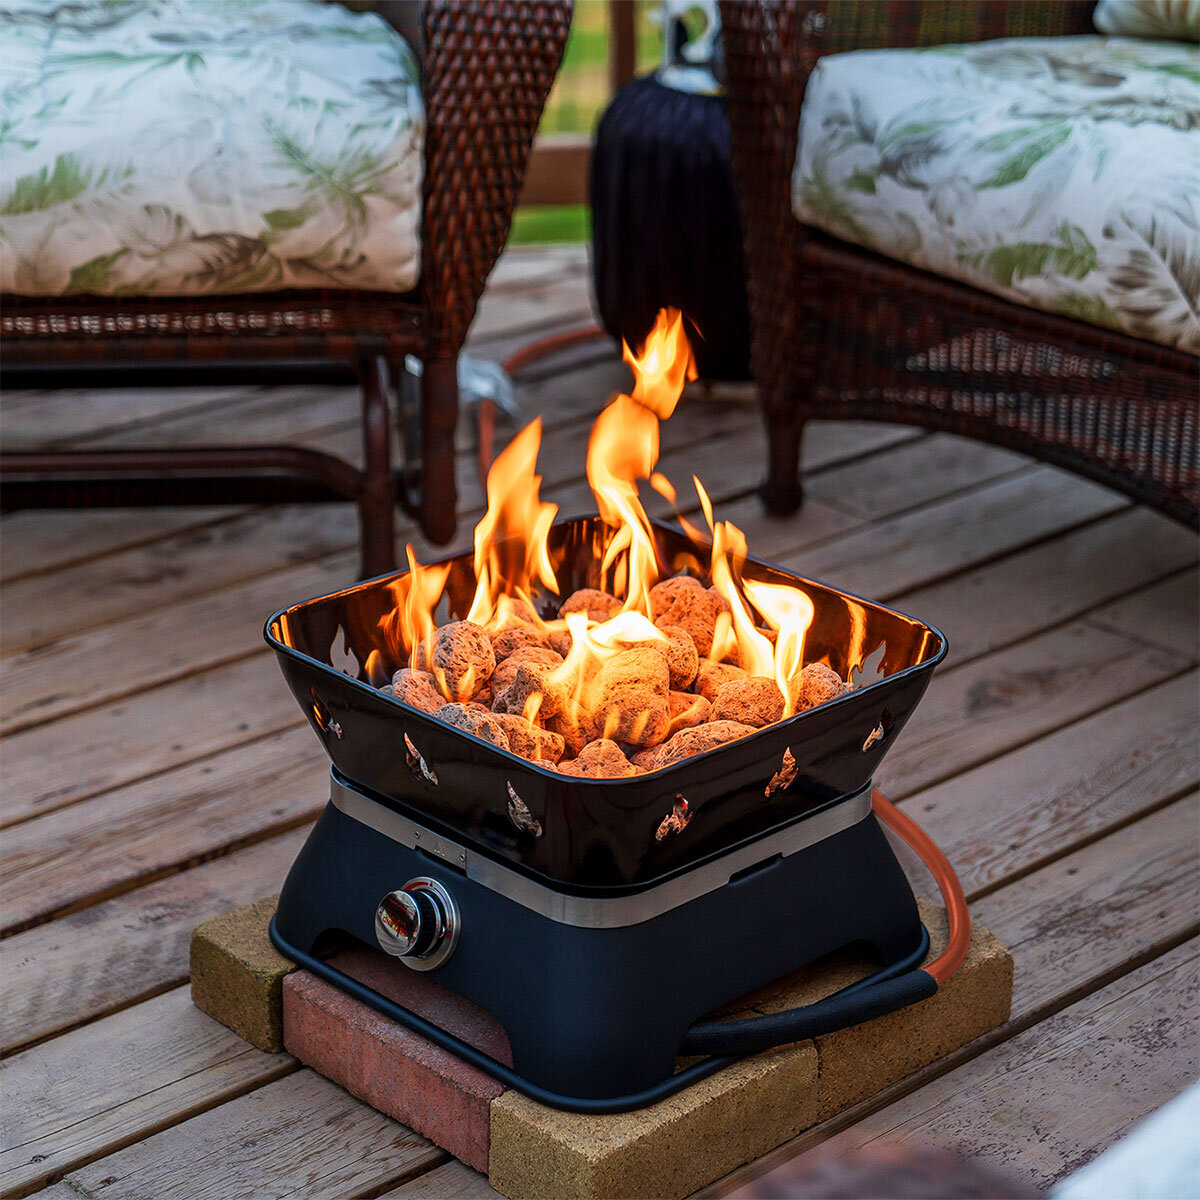 Outland Living Firecube with Cover & Carry Kit